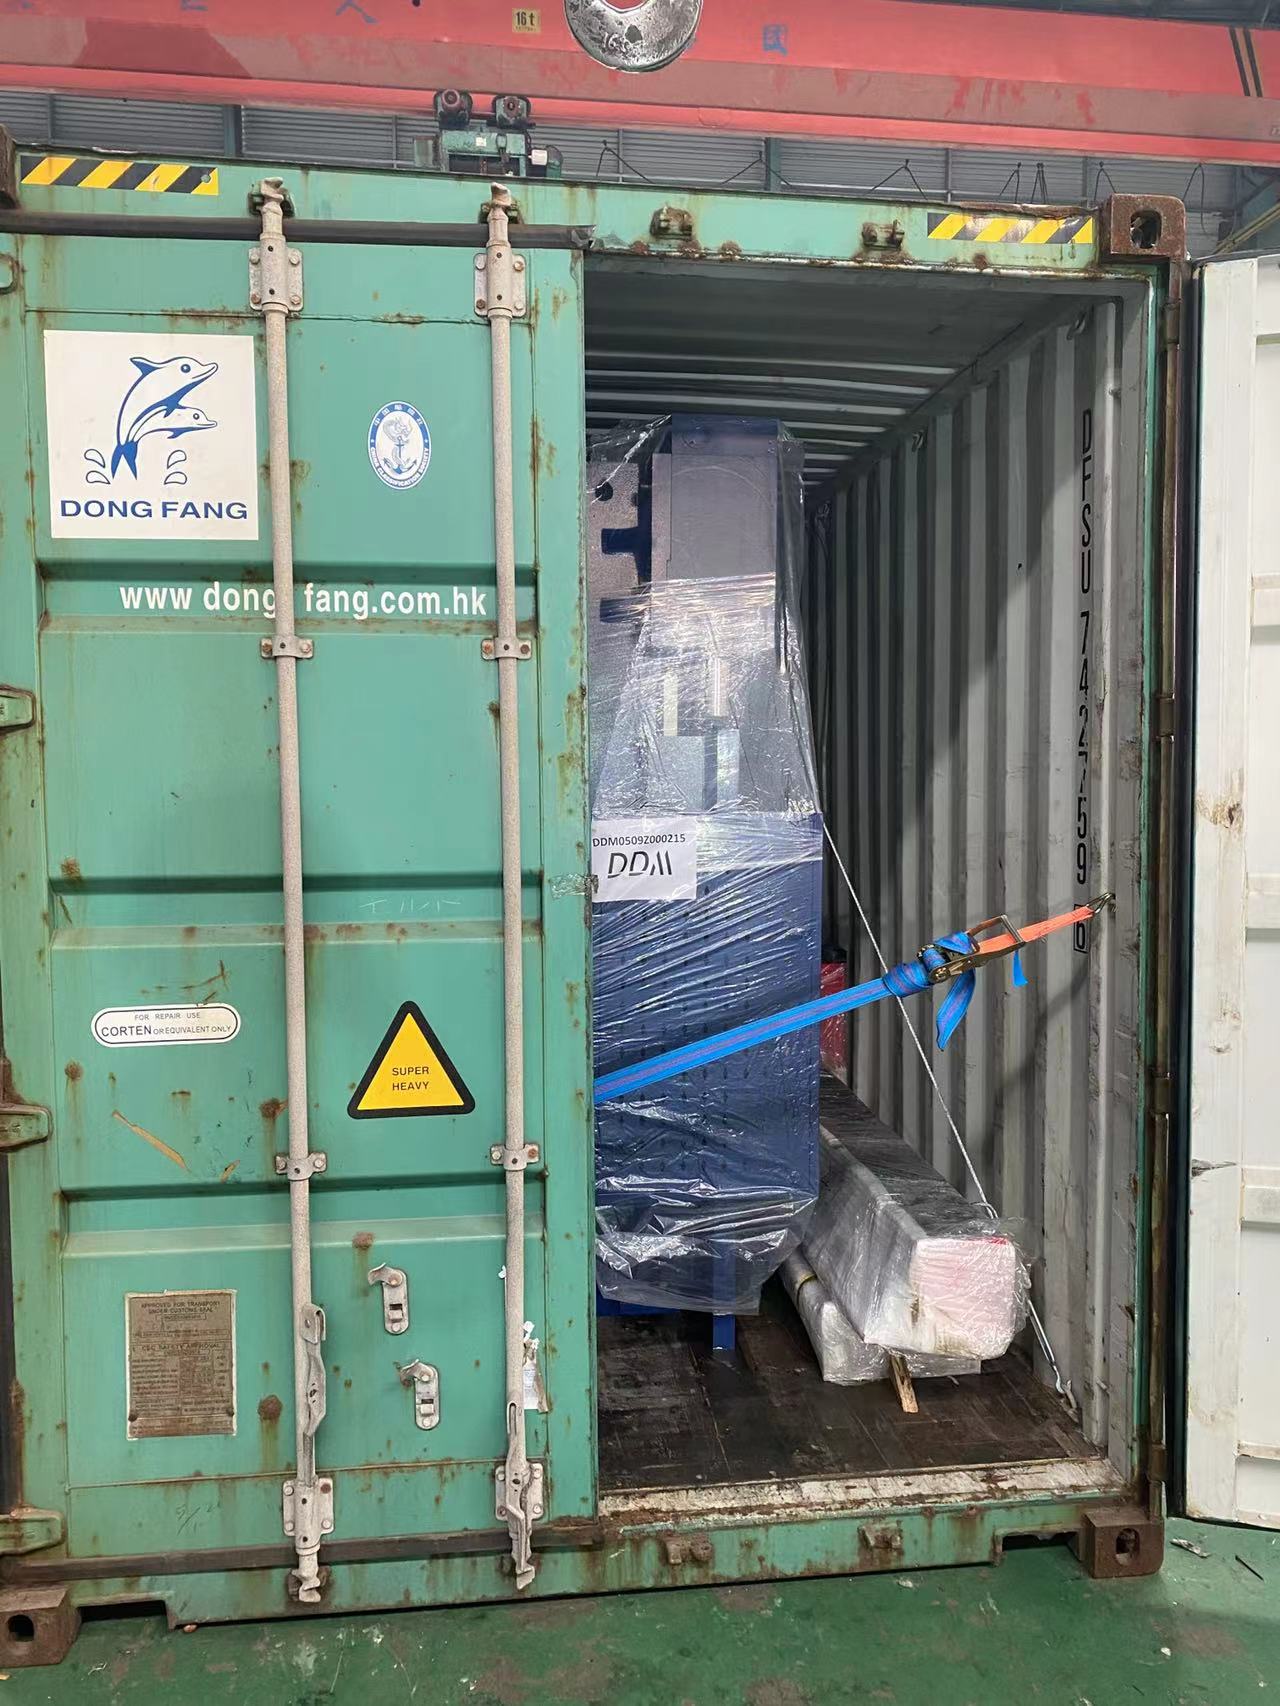 The container loading has finished for all of DDM machine 